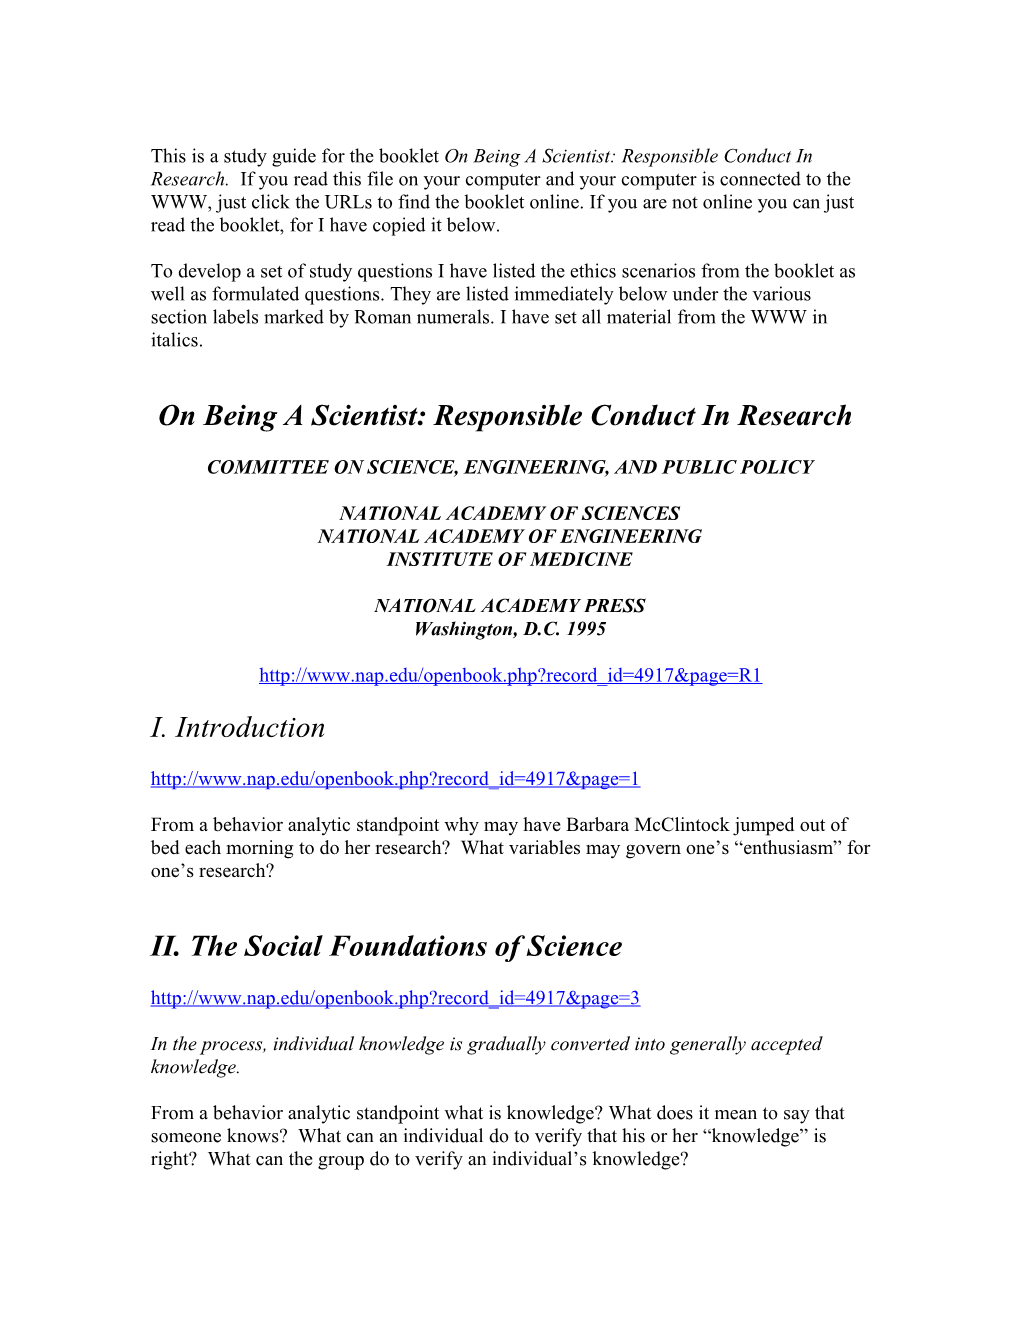 On Being a Scientist: Responsible Conduct in Research